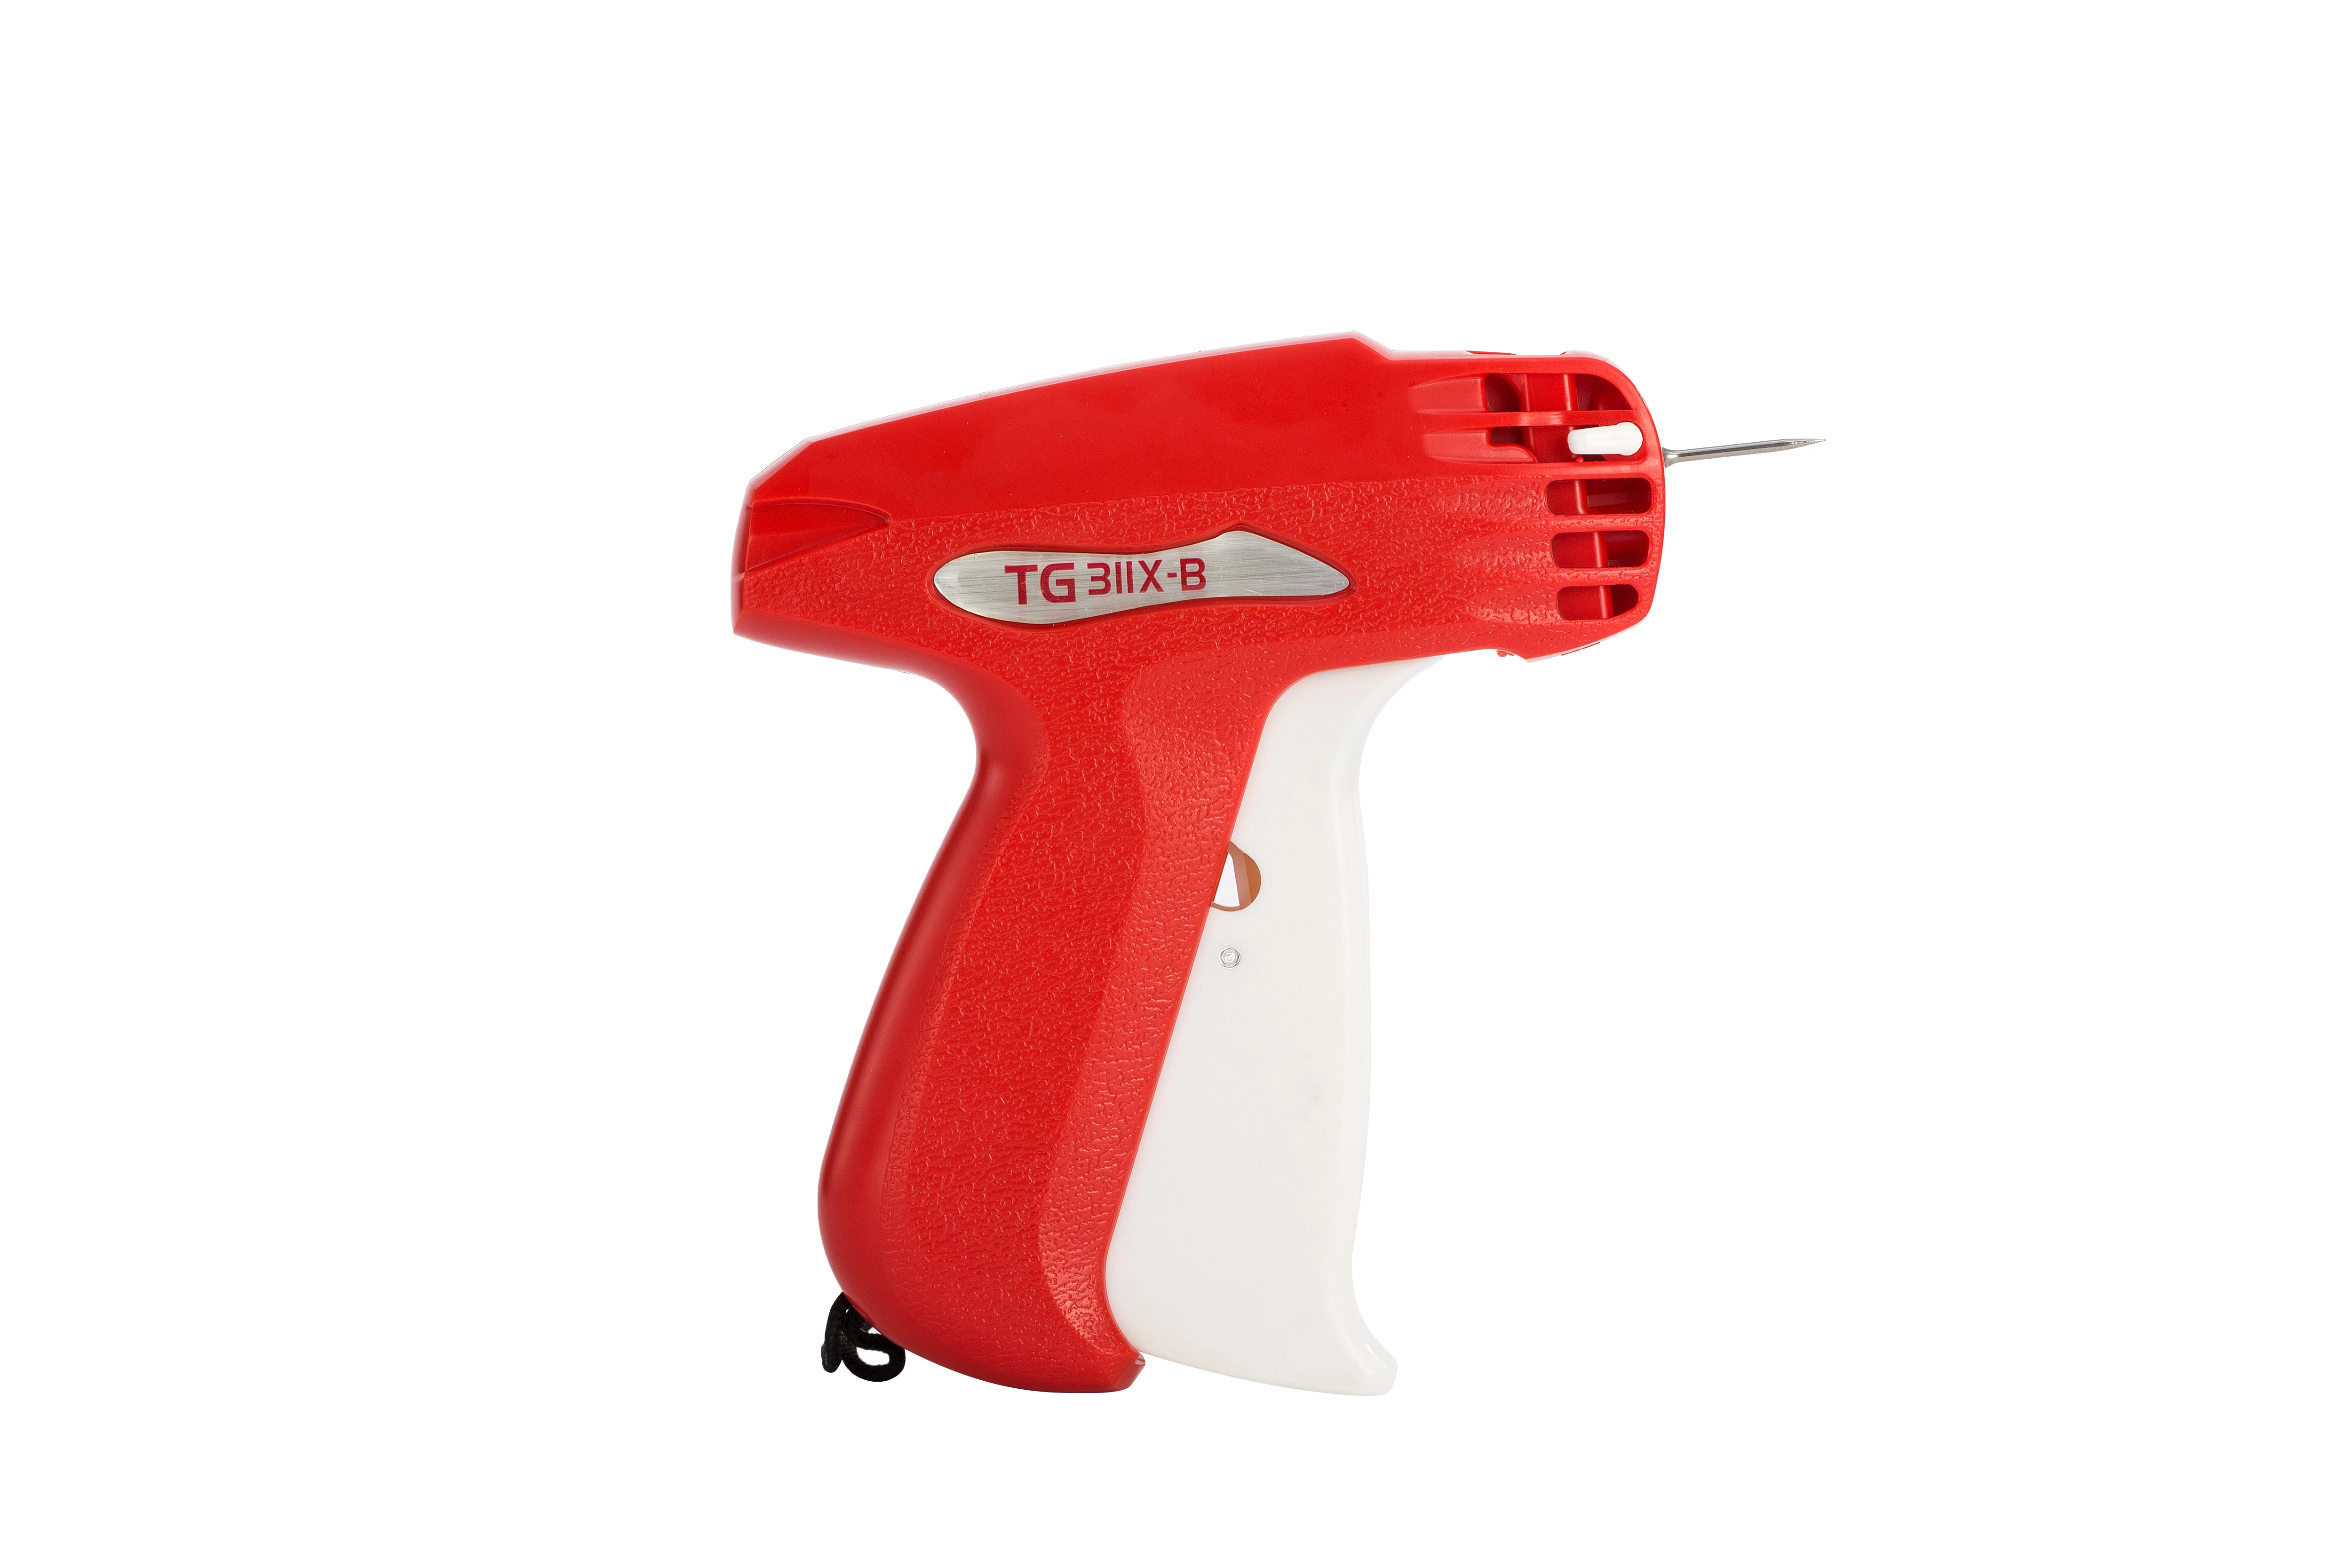 37mm Length All Steel Needle Standard Tagging Gun For Normal Tagging Work